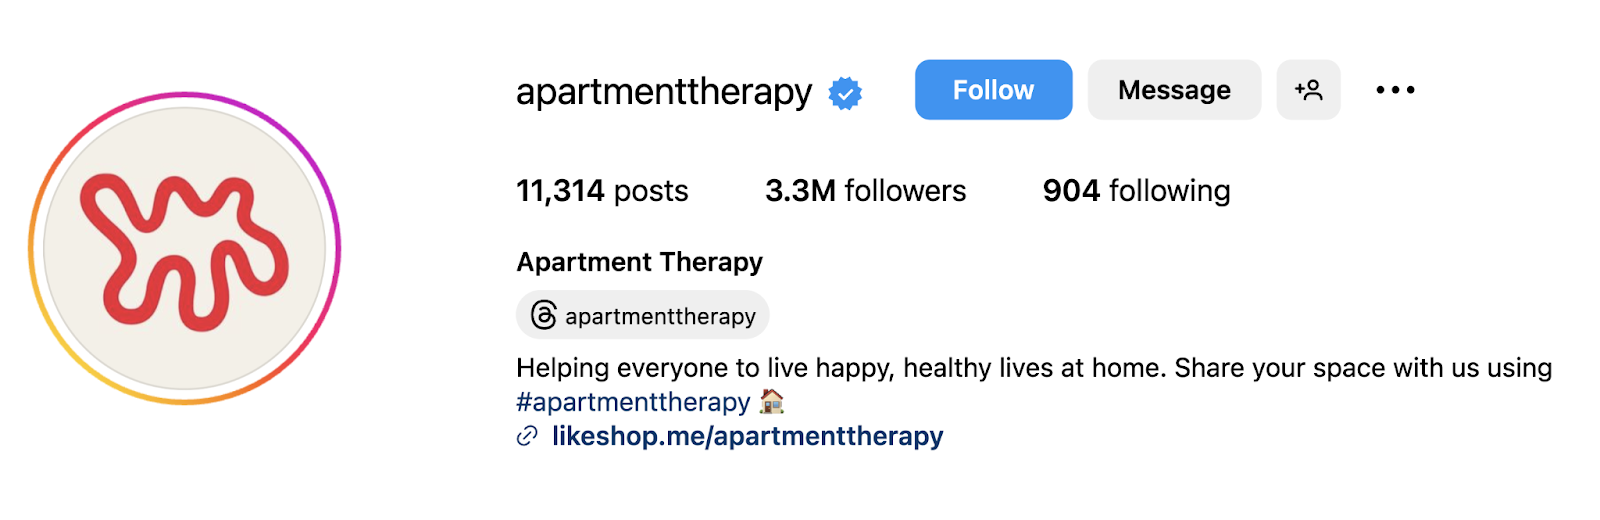 @apartmenttherapy Instagram profile, showing the fig   of followers